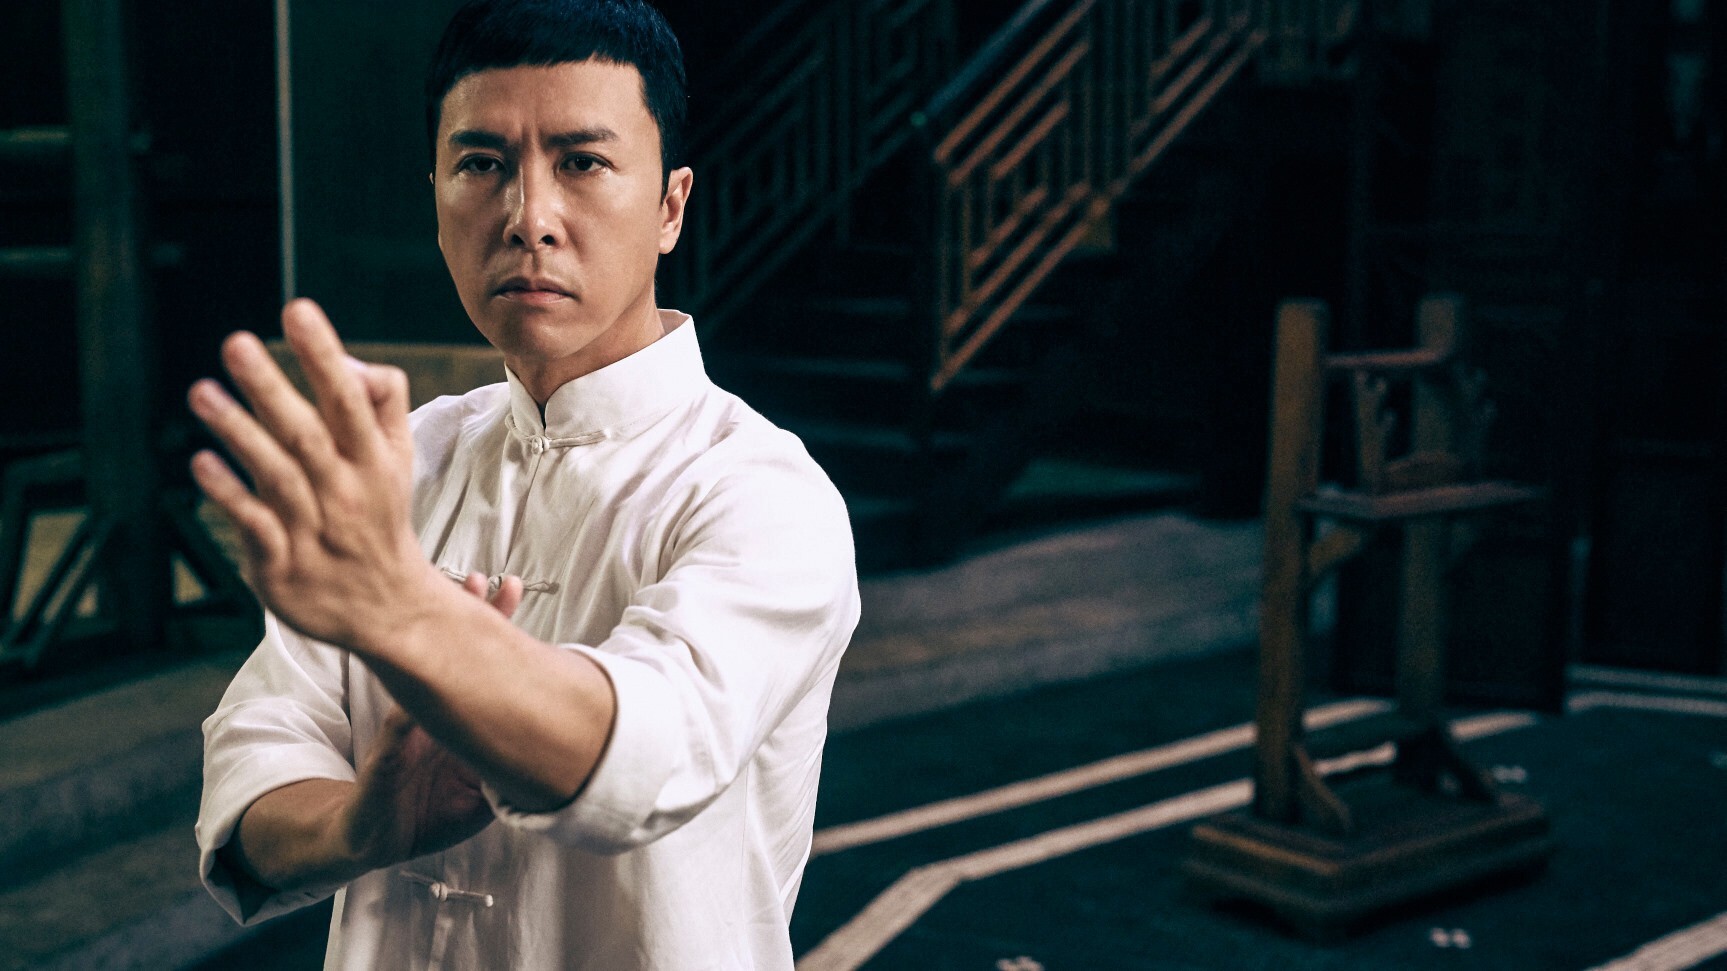 Donnie Yen in Ip Man 3 (2015), directed by Wilson Yip.